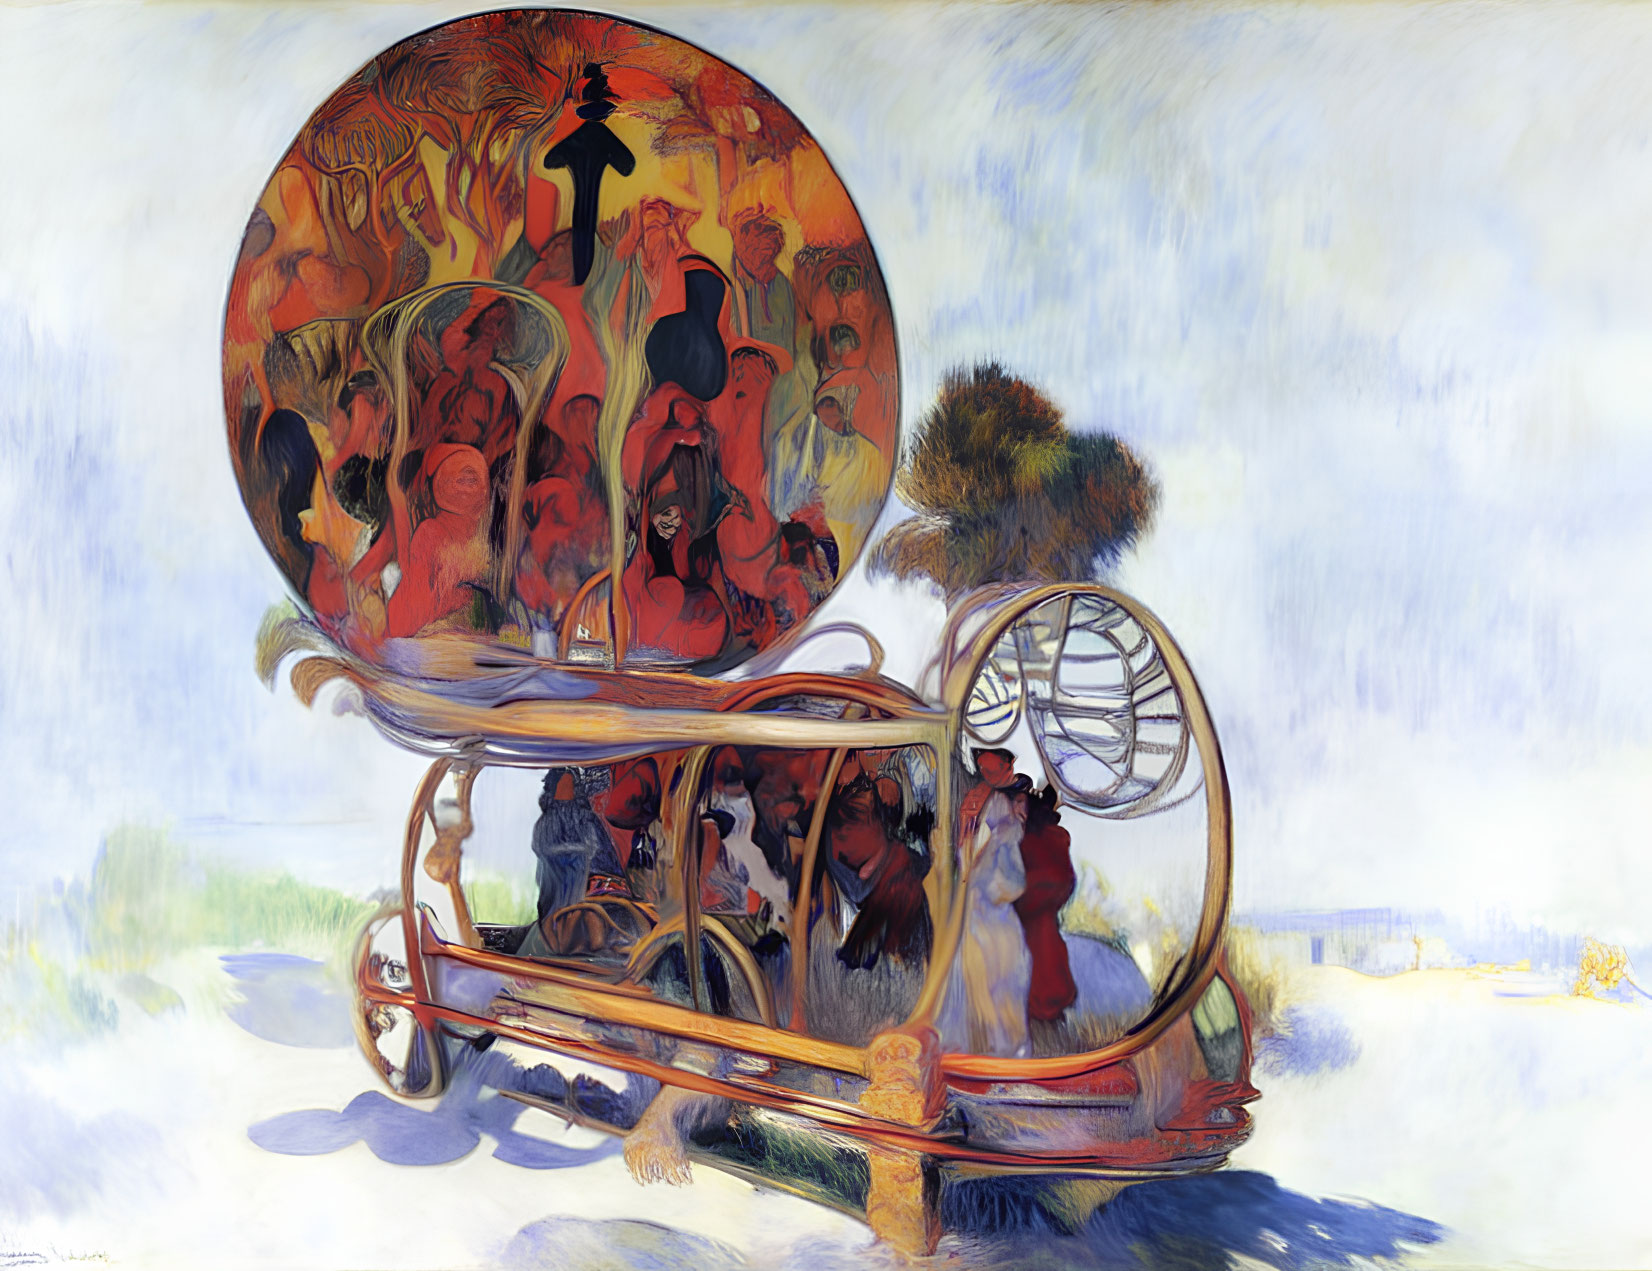 Colorful Fantastical Sleigh Painting with Orange Wheel & Whimsical Characters